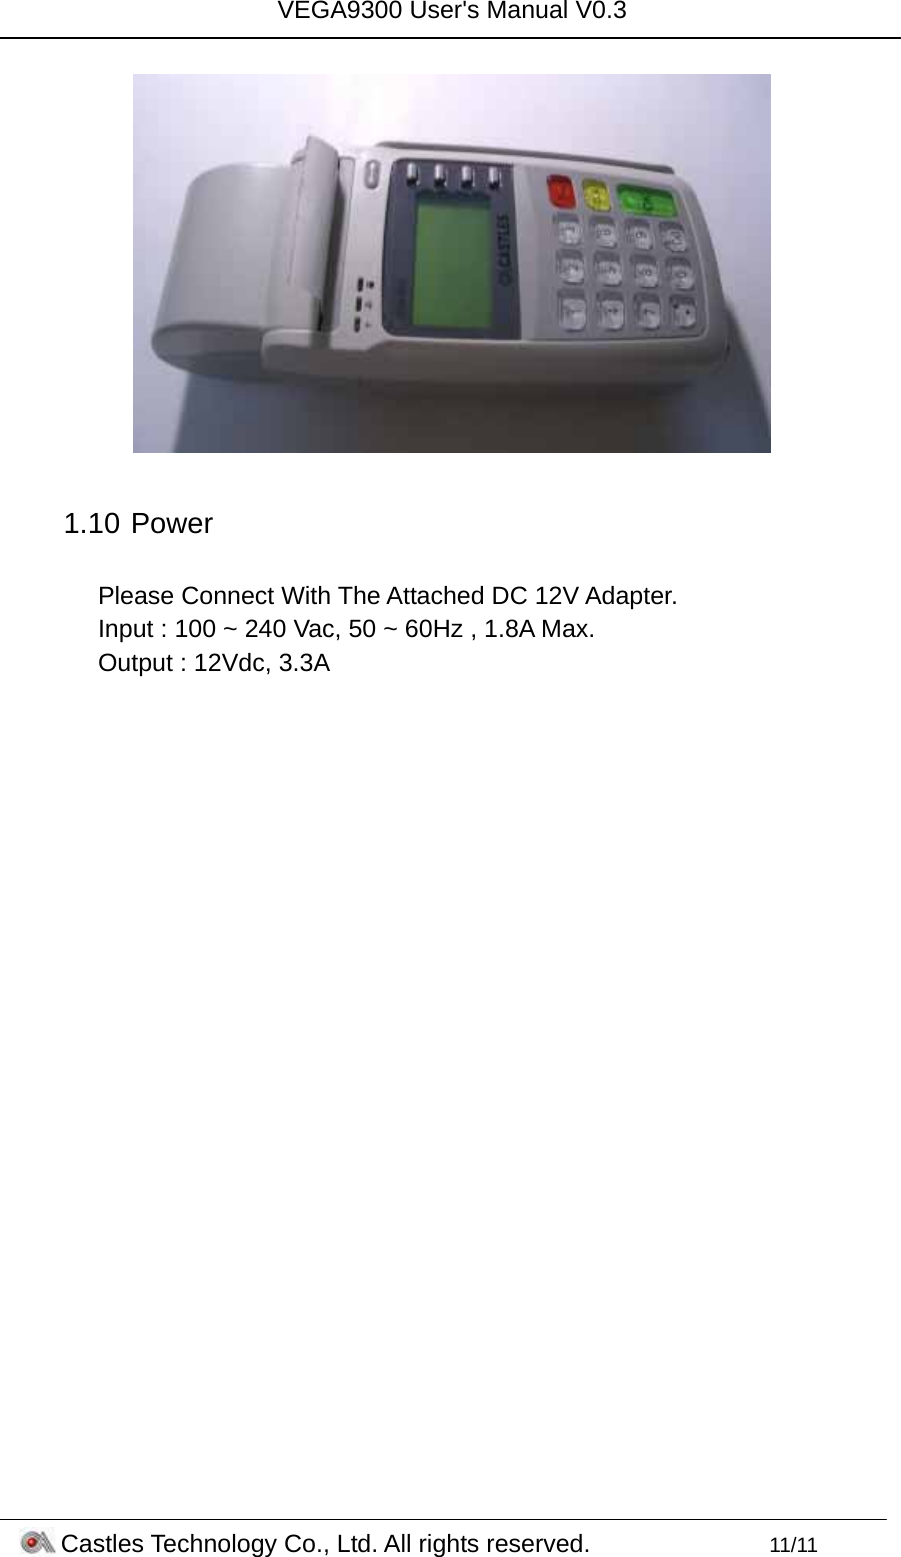 VEGA9300 User&apos;s Manual V0.3 Castles Technology Co., Ltd. All rights reserved.        11/11   1.10   Power  Please Connect With The Attached DC 12V Adapter.  Input : 100 ~ 240 Vac, 50 ~ 60Hz , 1.8A Max. Output : 12Vdc, 3.3A  